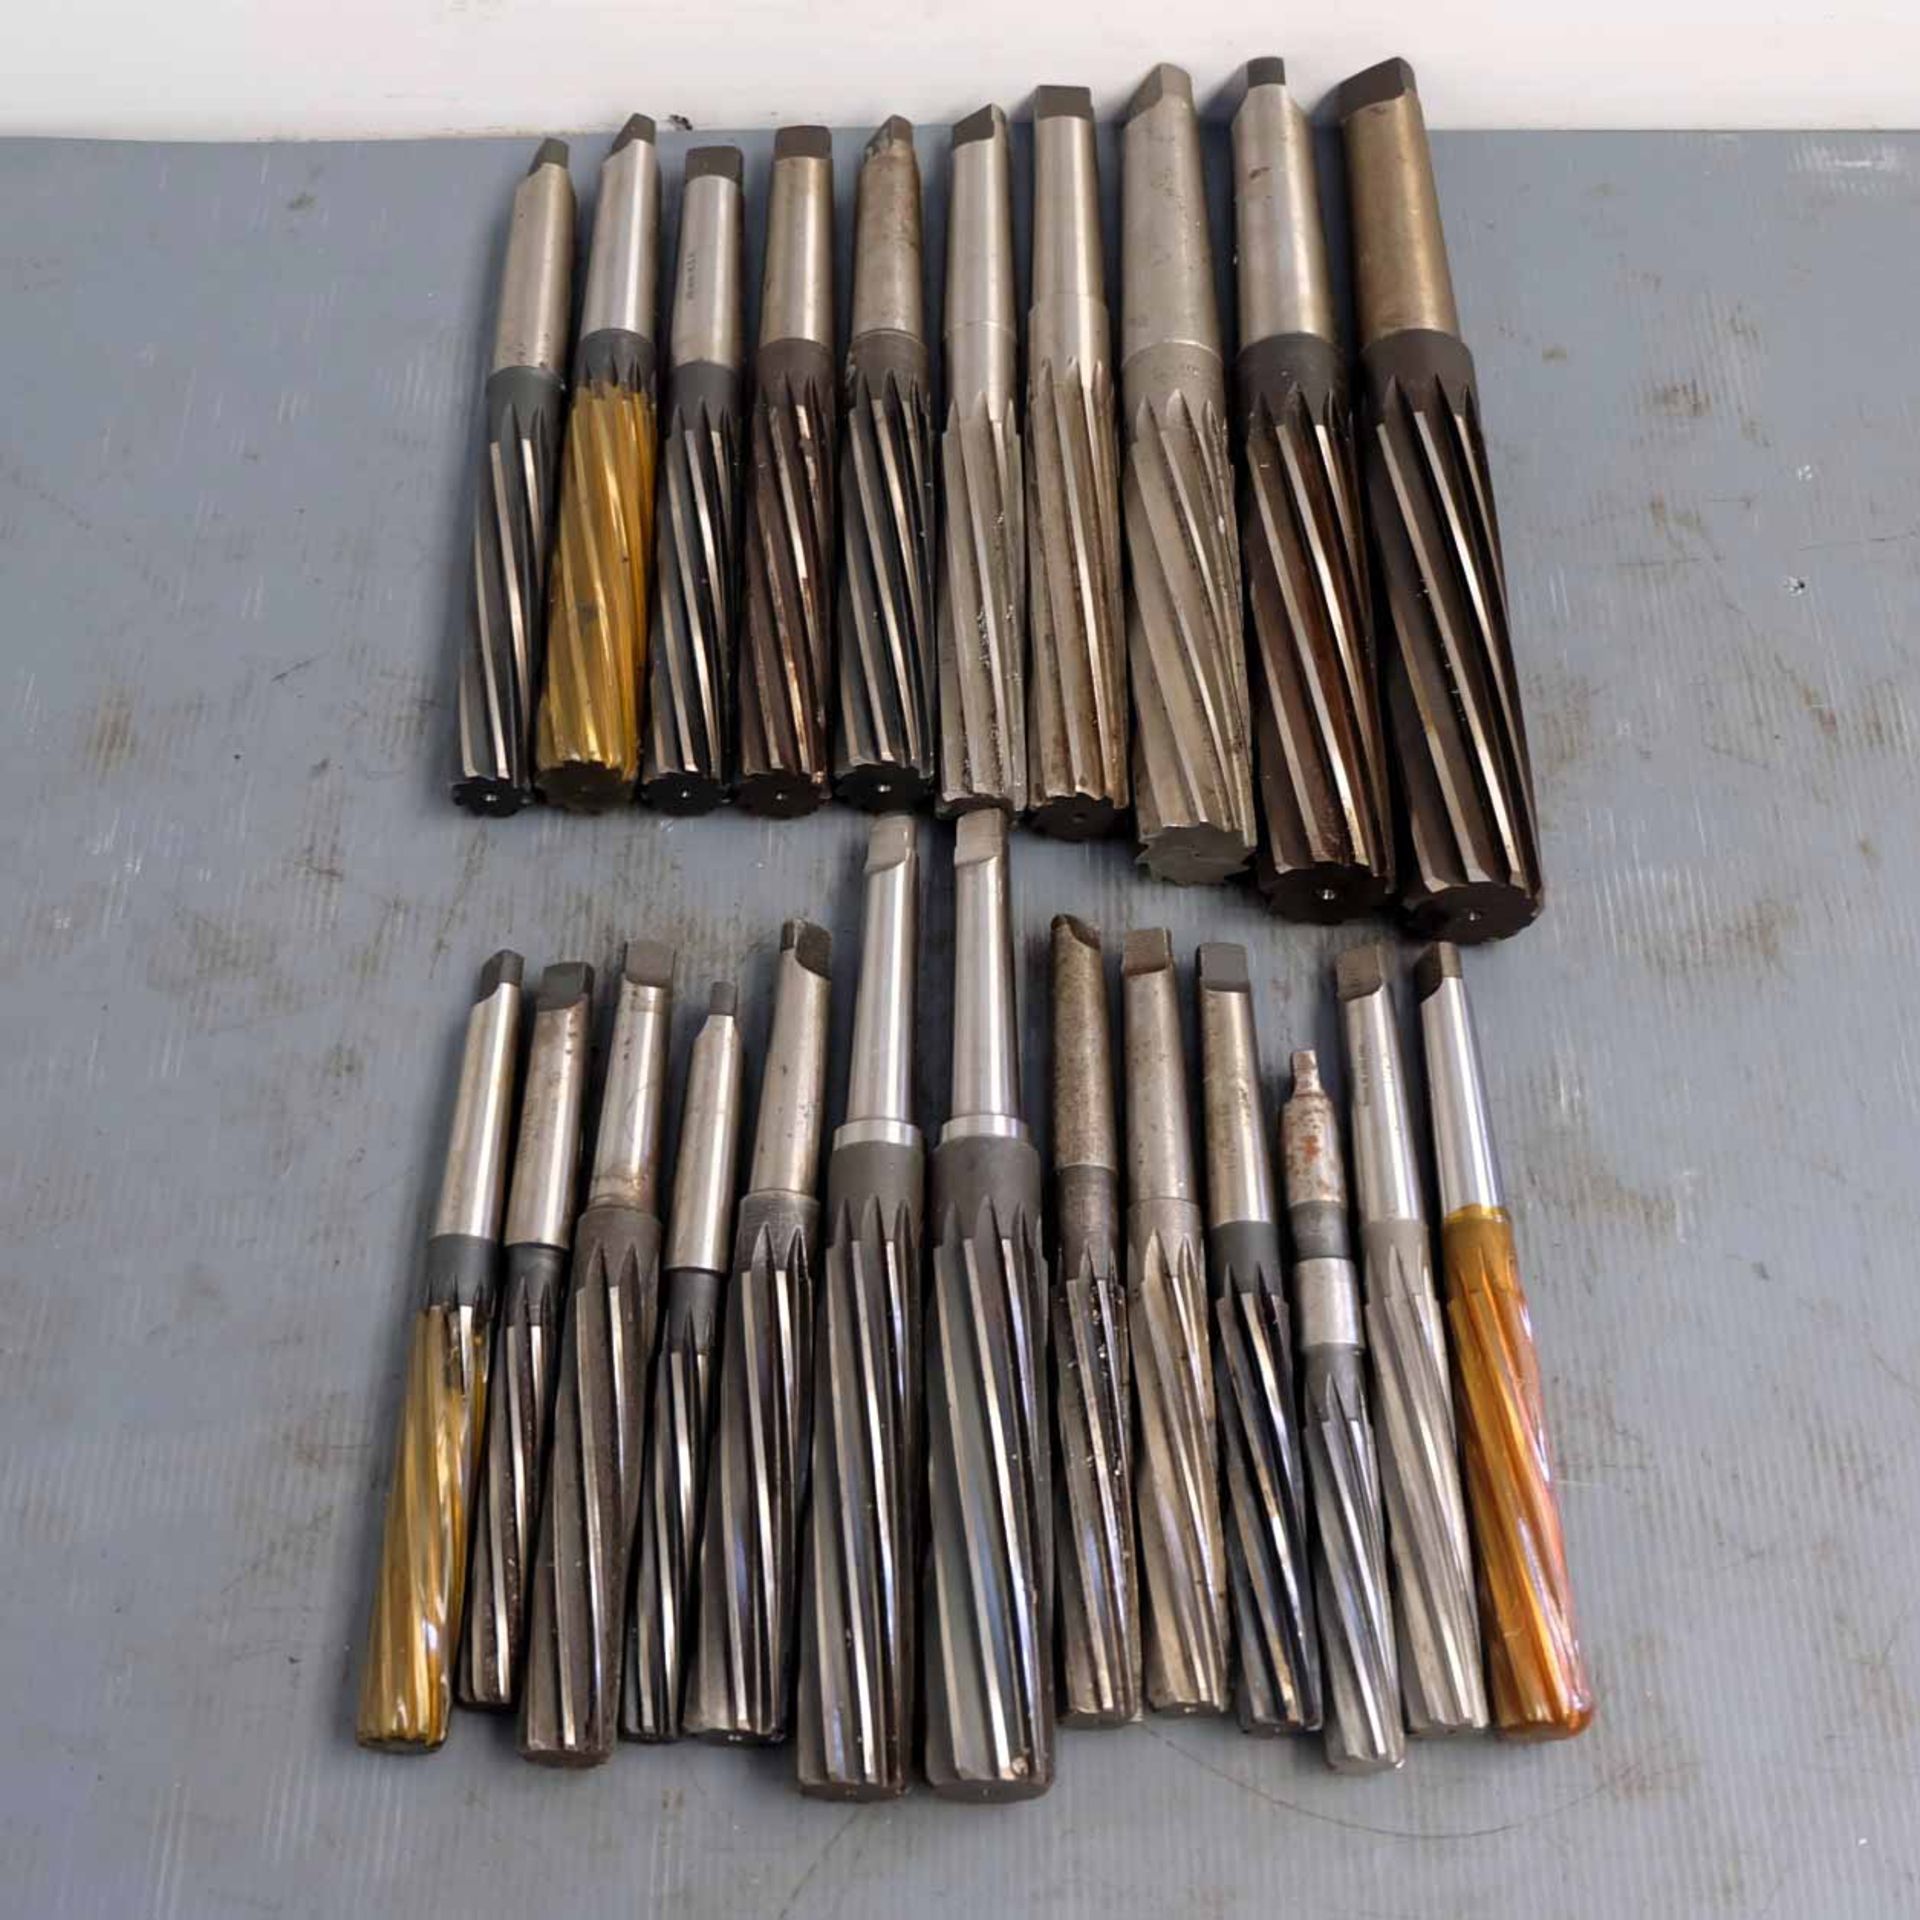 Quantity of Reamers. Various Metric Sizes. 2, 3 & 4 MT.